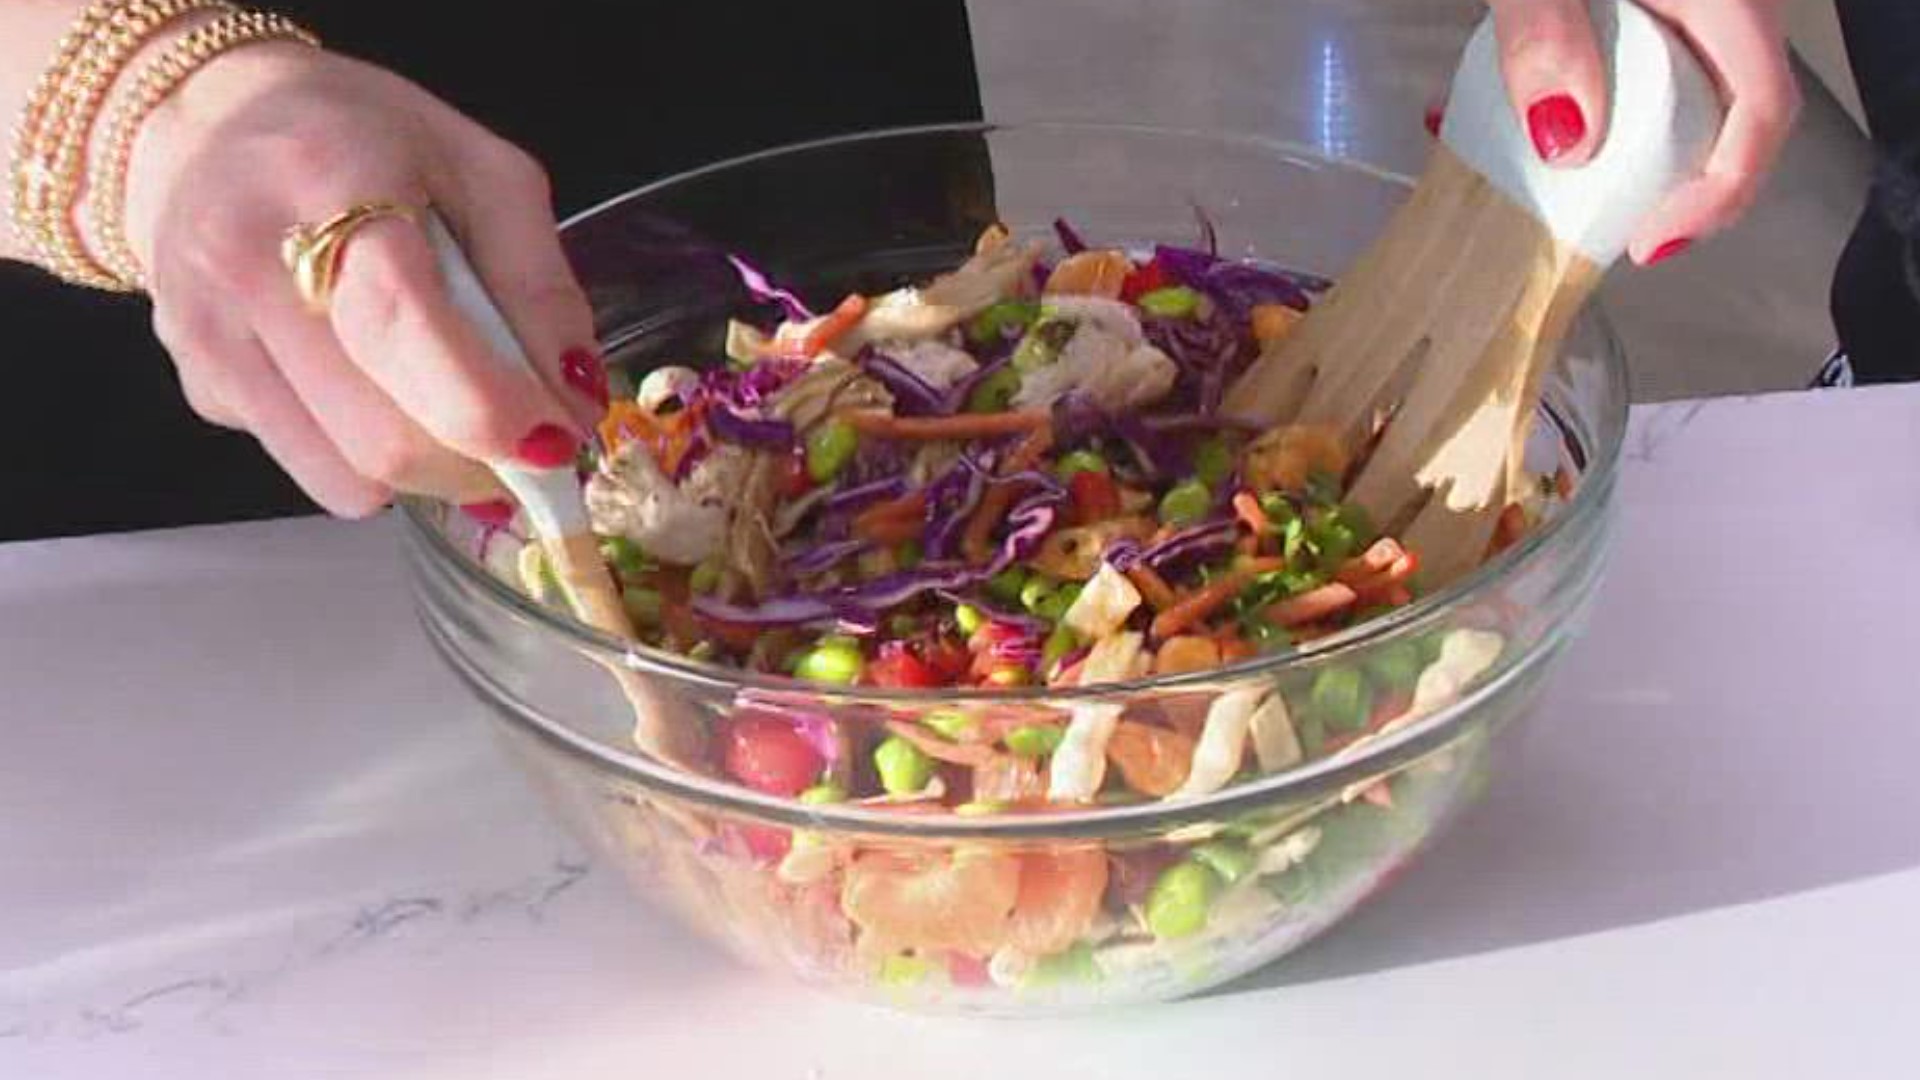 Emily Cline's Chinese chicken salad is like a "rainbow in a bowl."